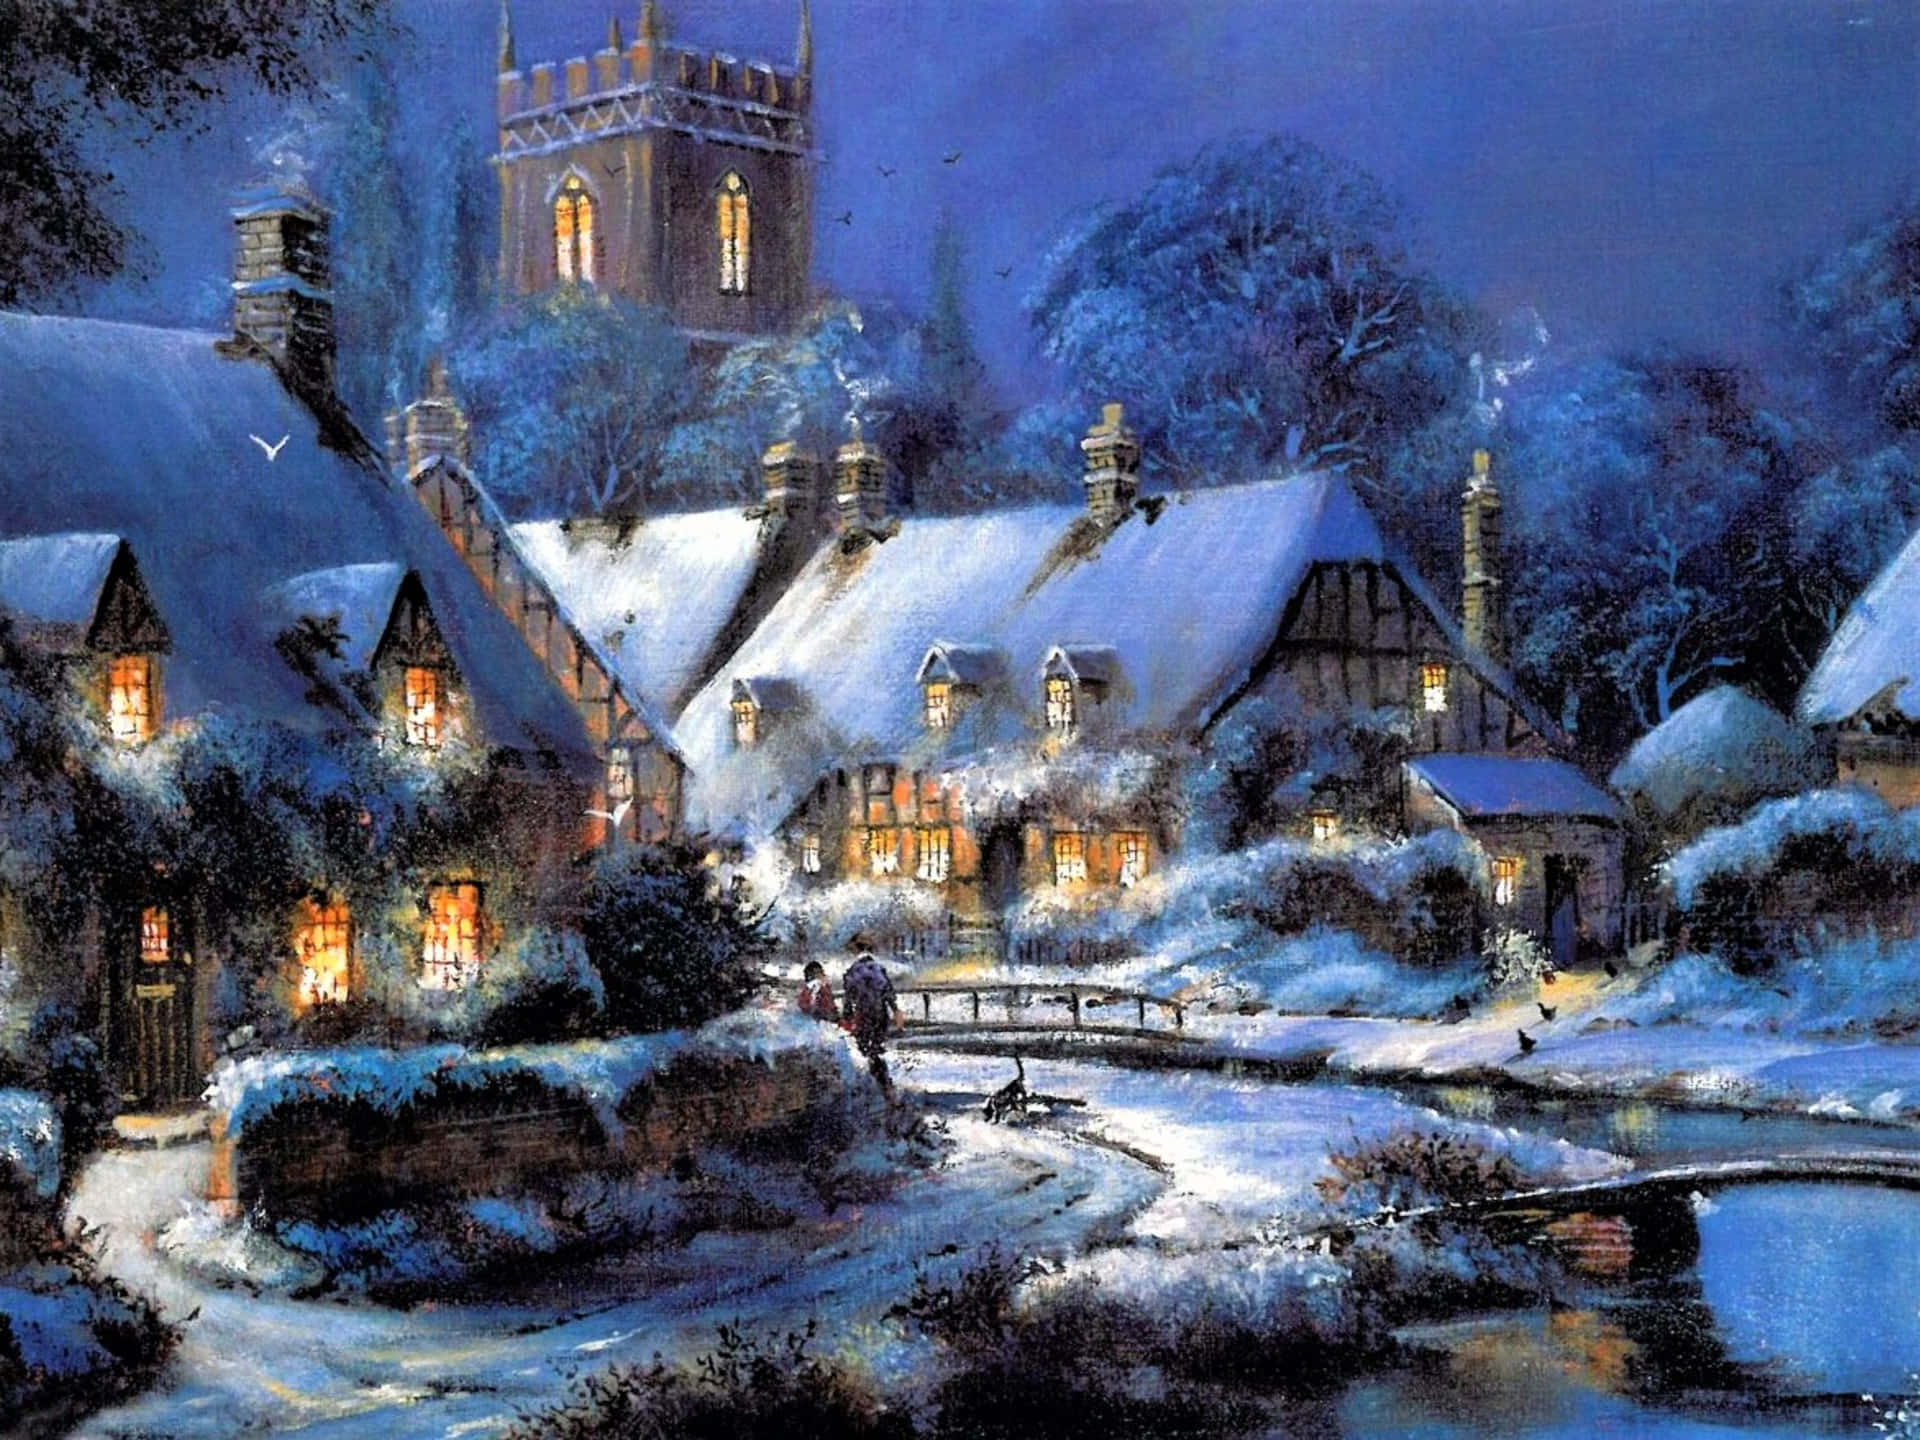 Enchanting Snow-Covered Village in Winter Wallpaper